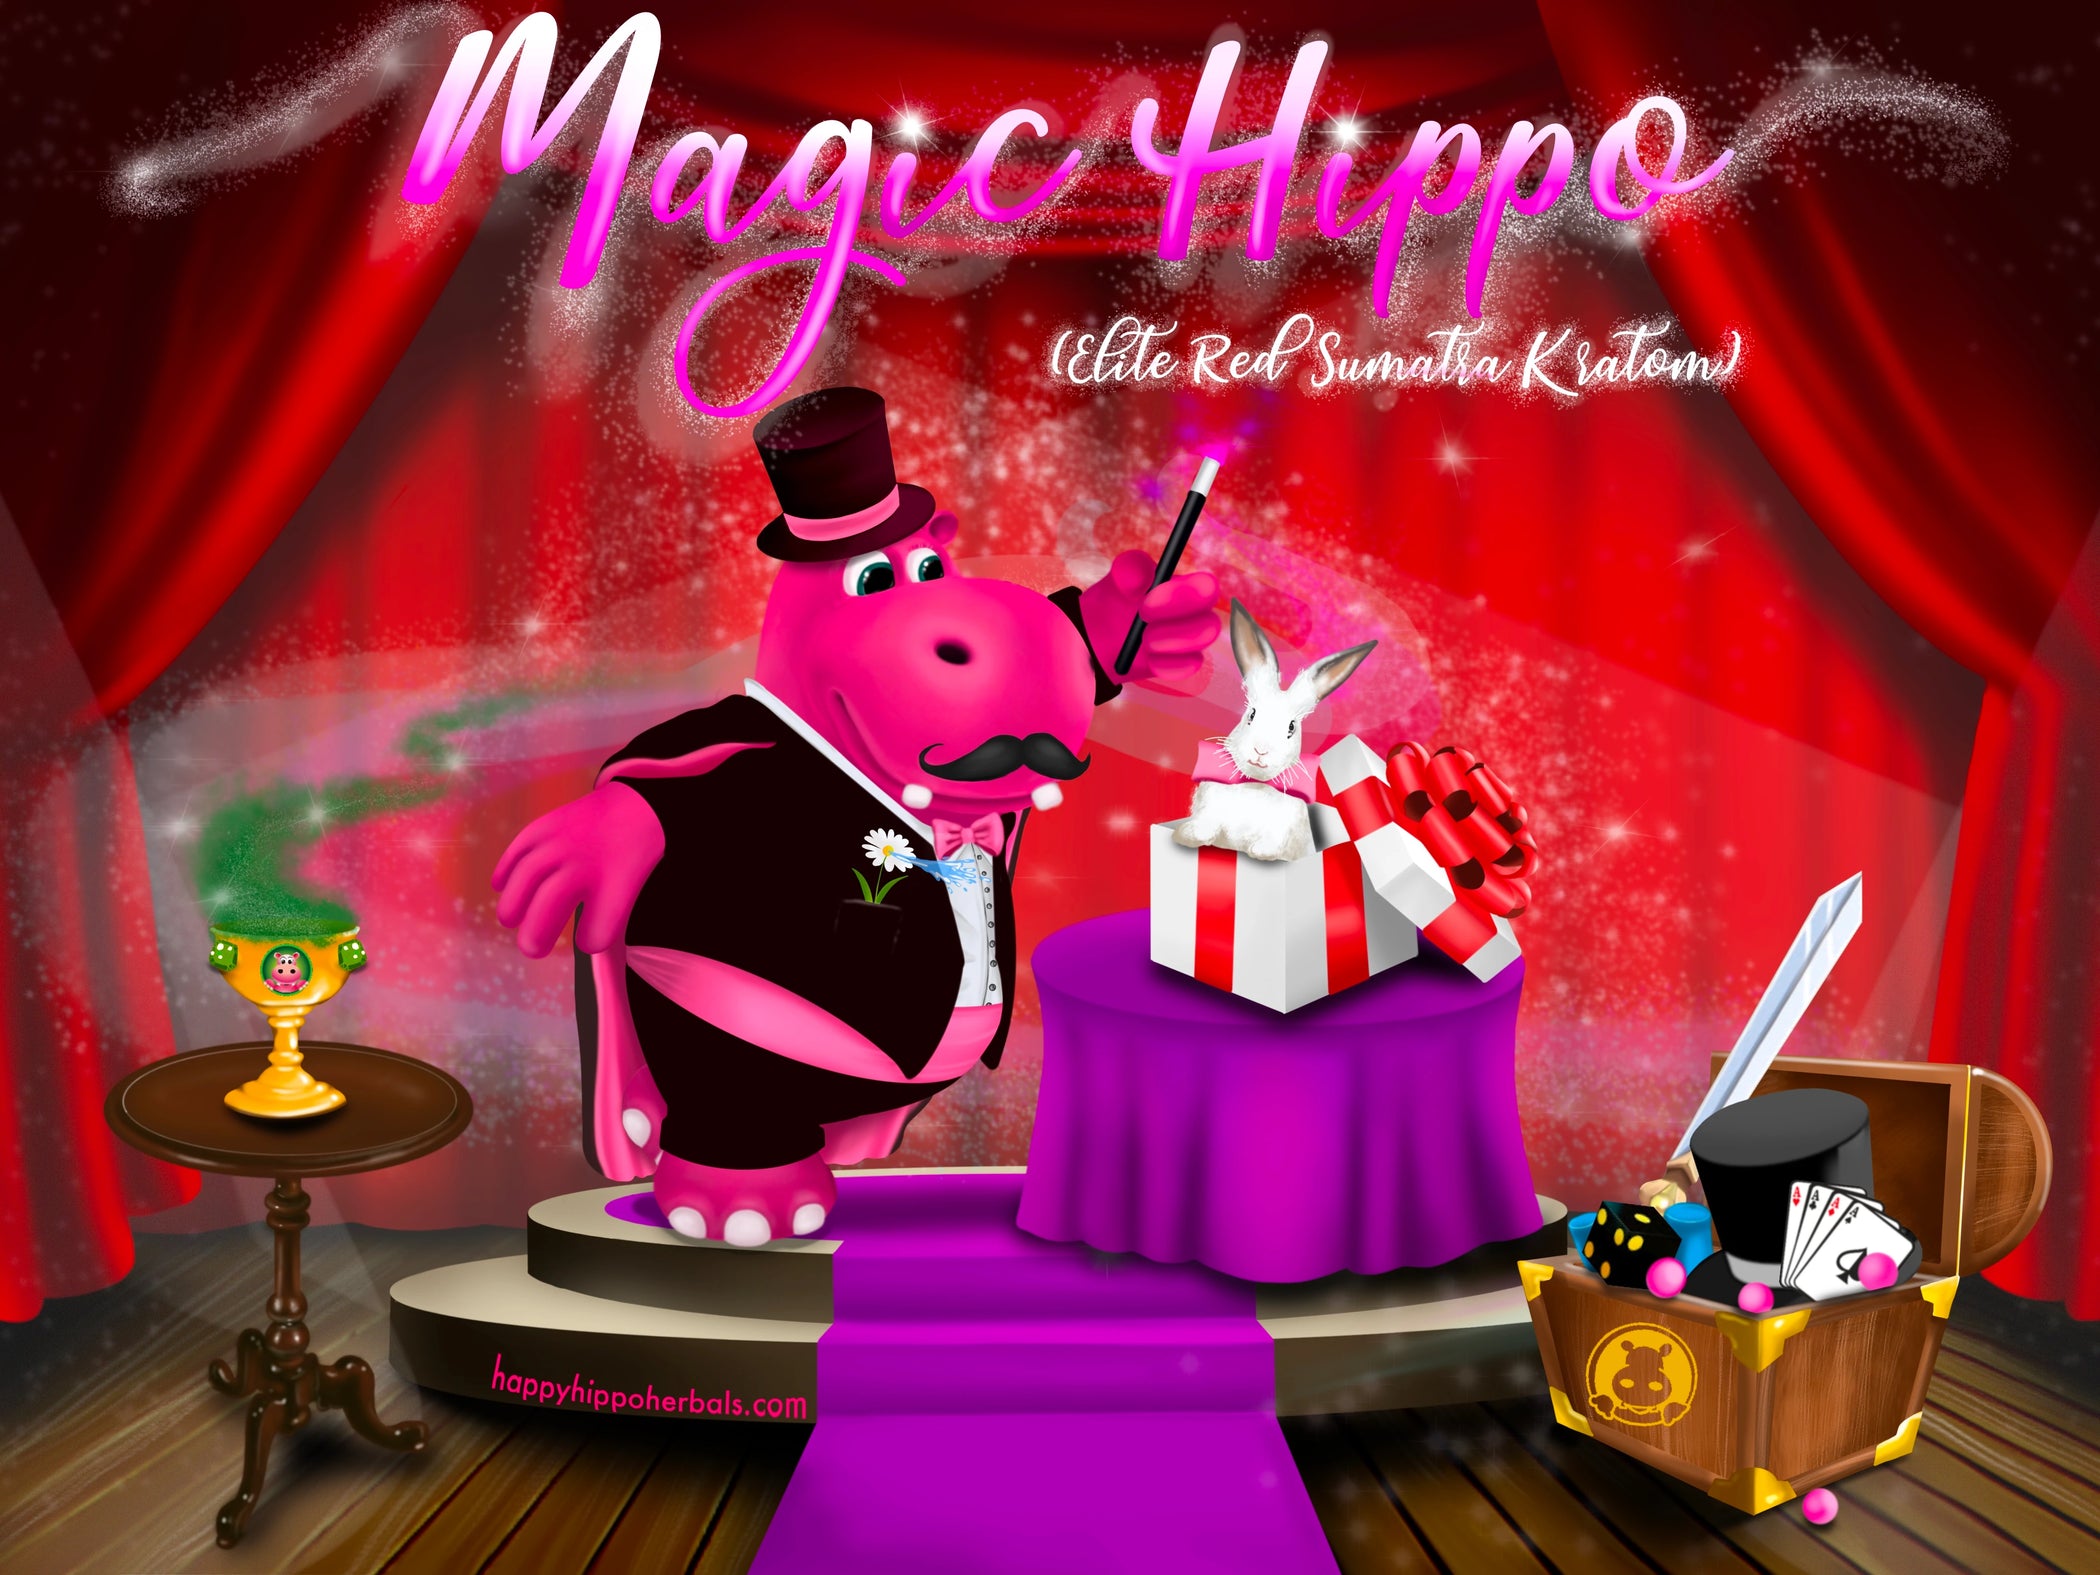 Graphic Designed image depicting Puddles the Hippo wearing a tuxedo and performing magic with a goblet of Red Sumatra Kratom Powder (Magic Hippo)